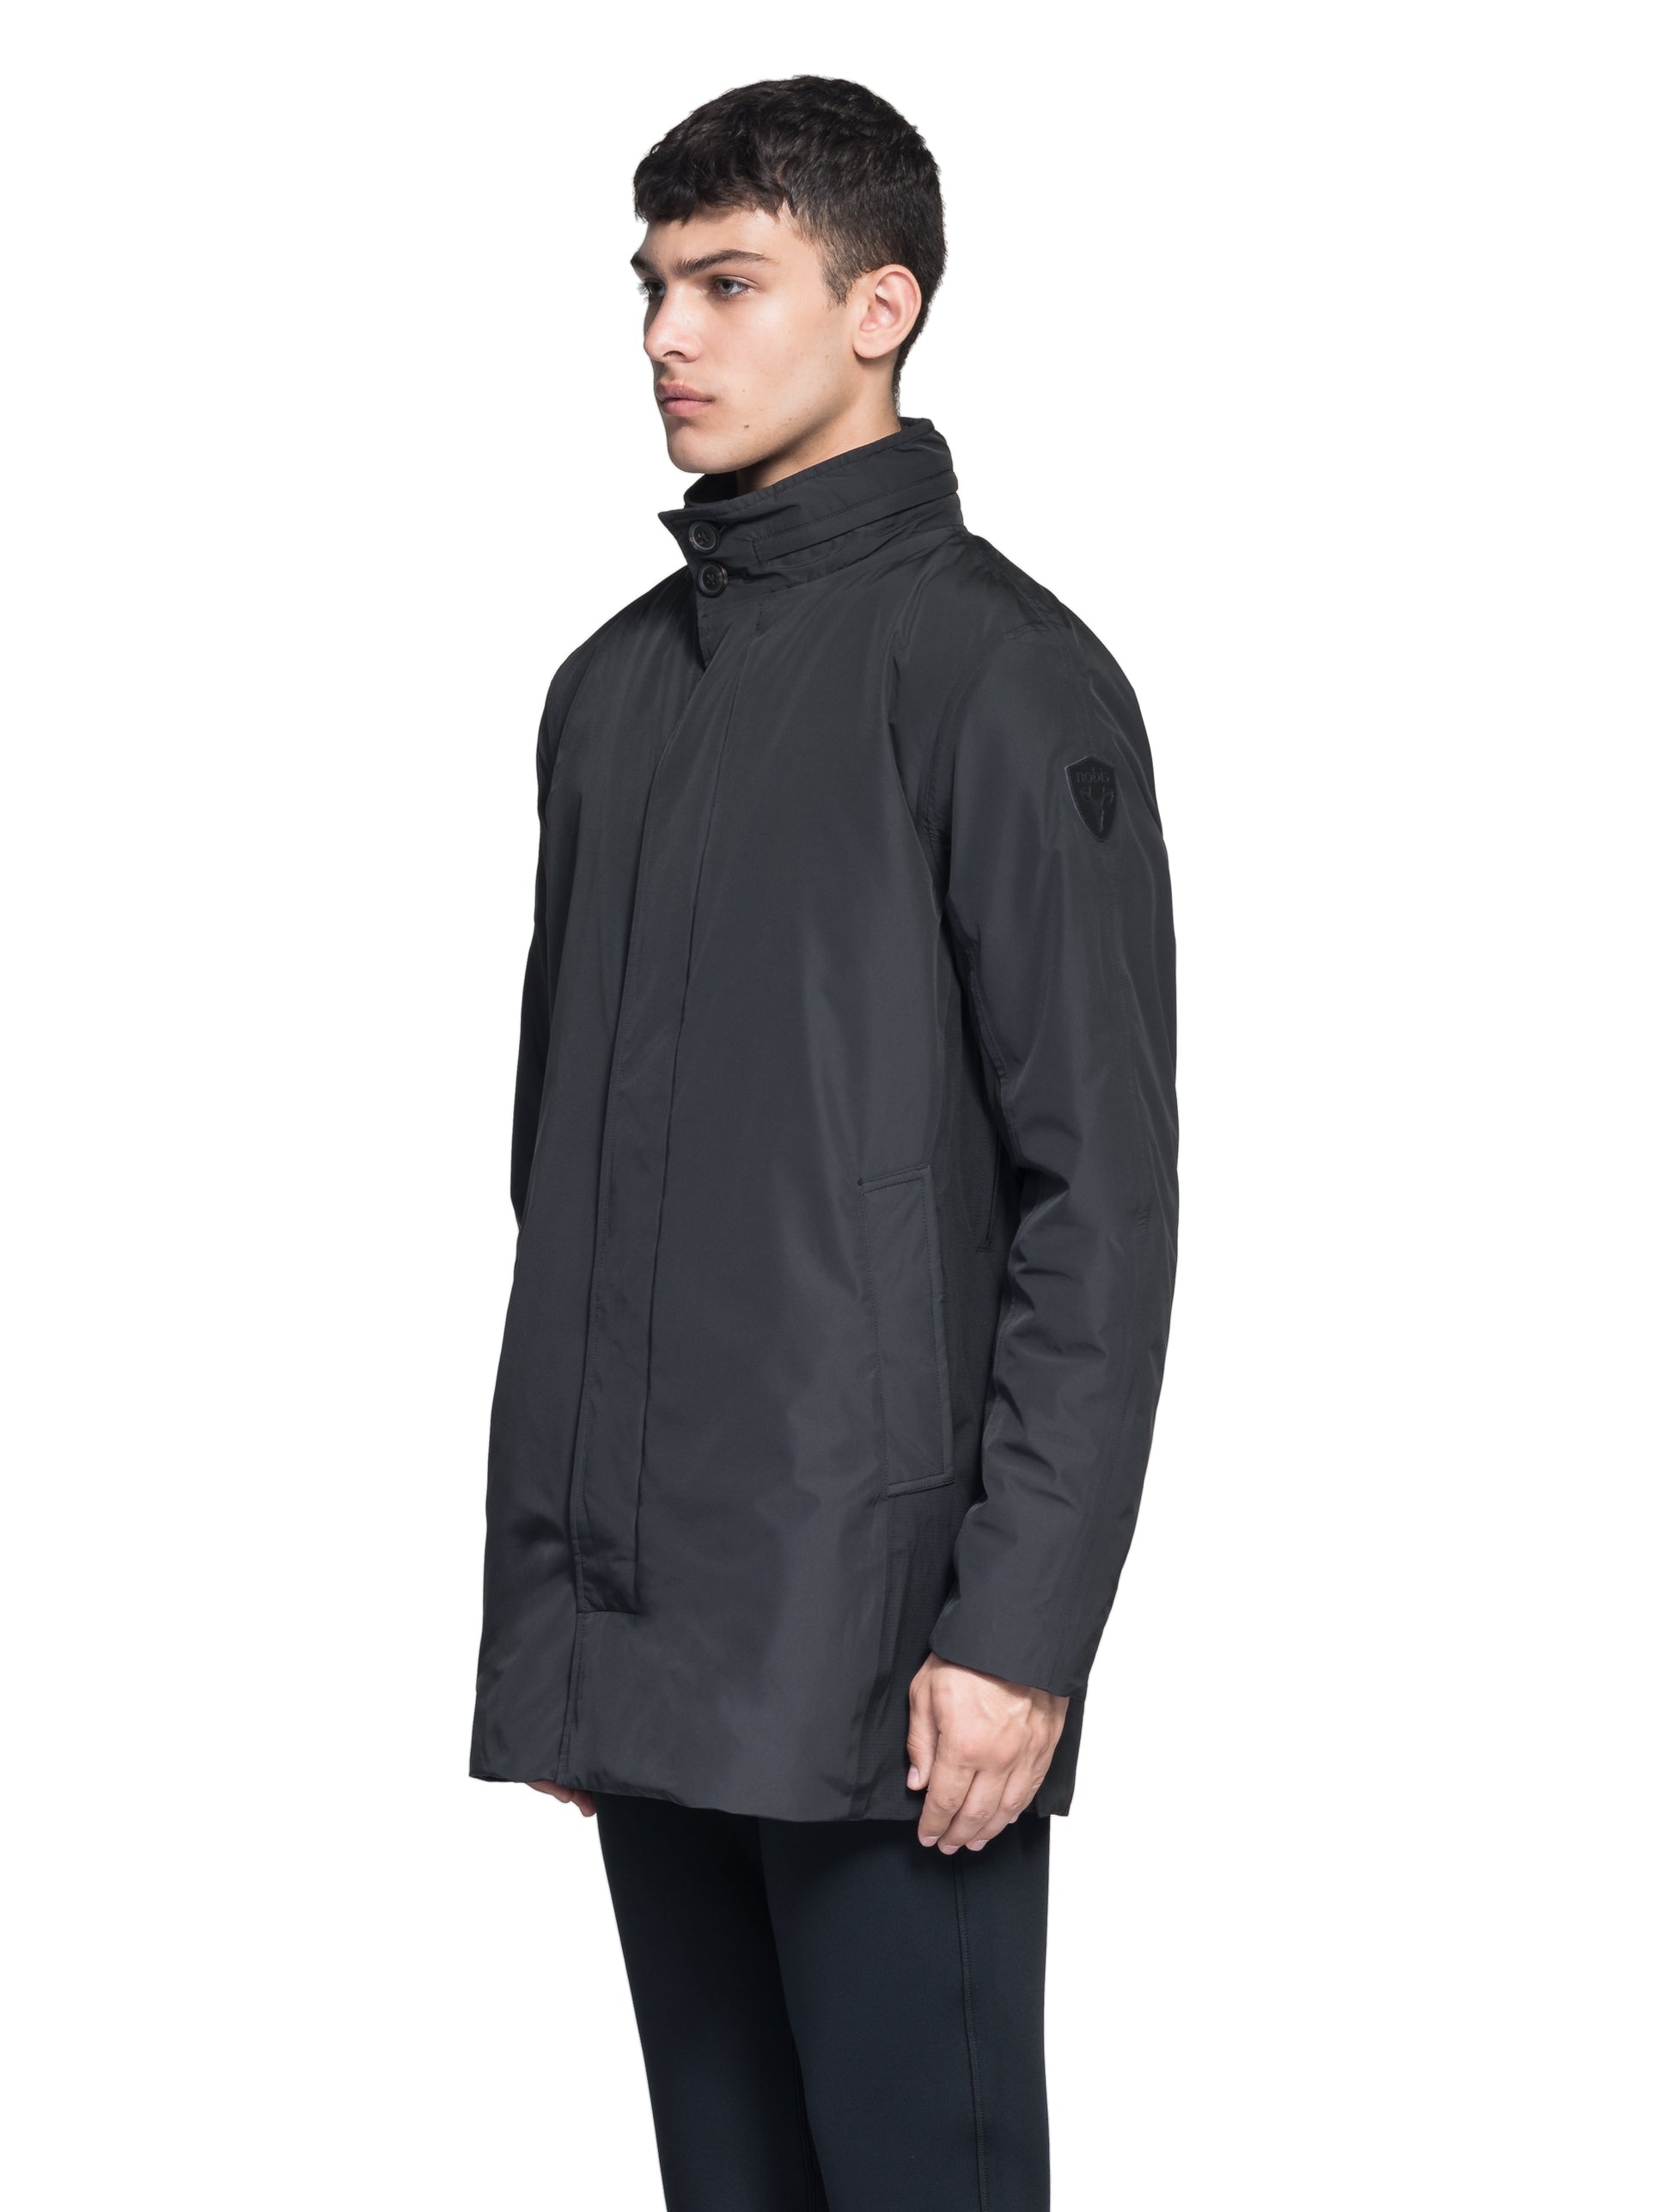 Pike Men's Tailored Mac Coat in thigh length, premium 3-ply Micro Denier fabrication at body and cire technical nylon taffeta fabrication at hood, premium 4-way stretch, water resistant Primaloft Gold Insulation Active+, hidden 2-way zipper with snap closure wind flap, single welt pockets with magnetic closure at waist, hidden snap placket at cuffs, pit zippers for ventilation, interior zipper pocket at right chest, and interior button pocket at left chest, in Black